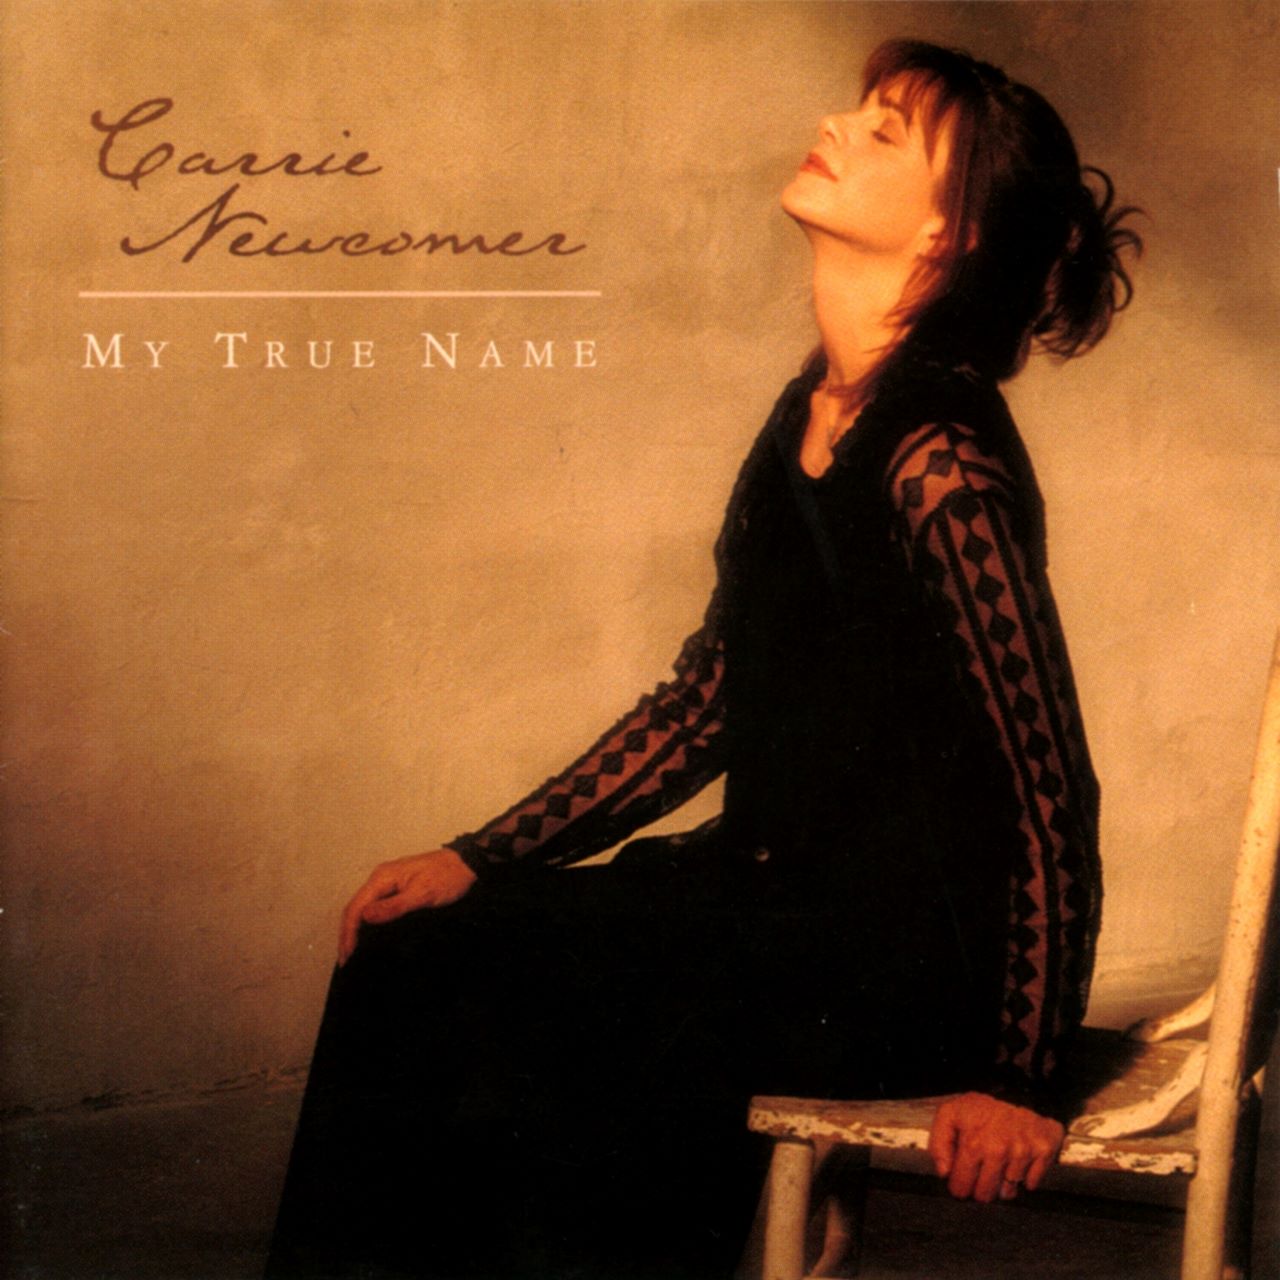 Carrie Newcomer - My True Name cover album